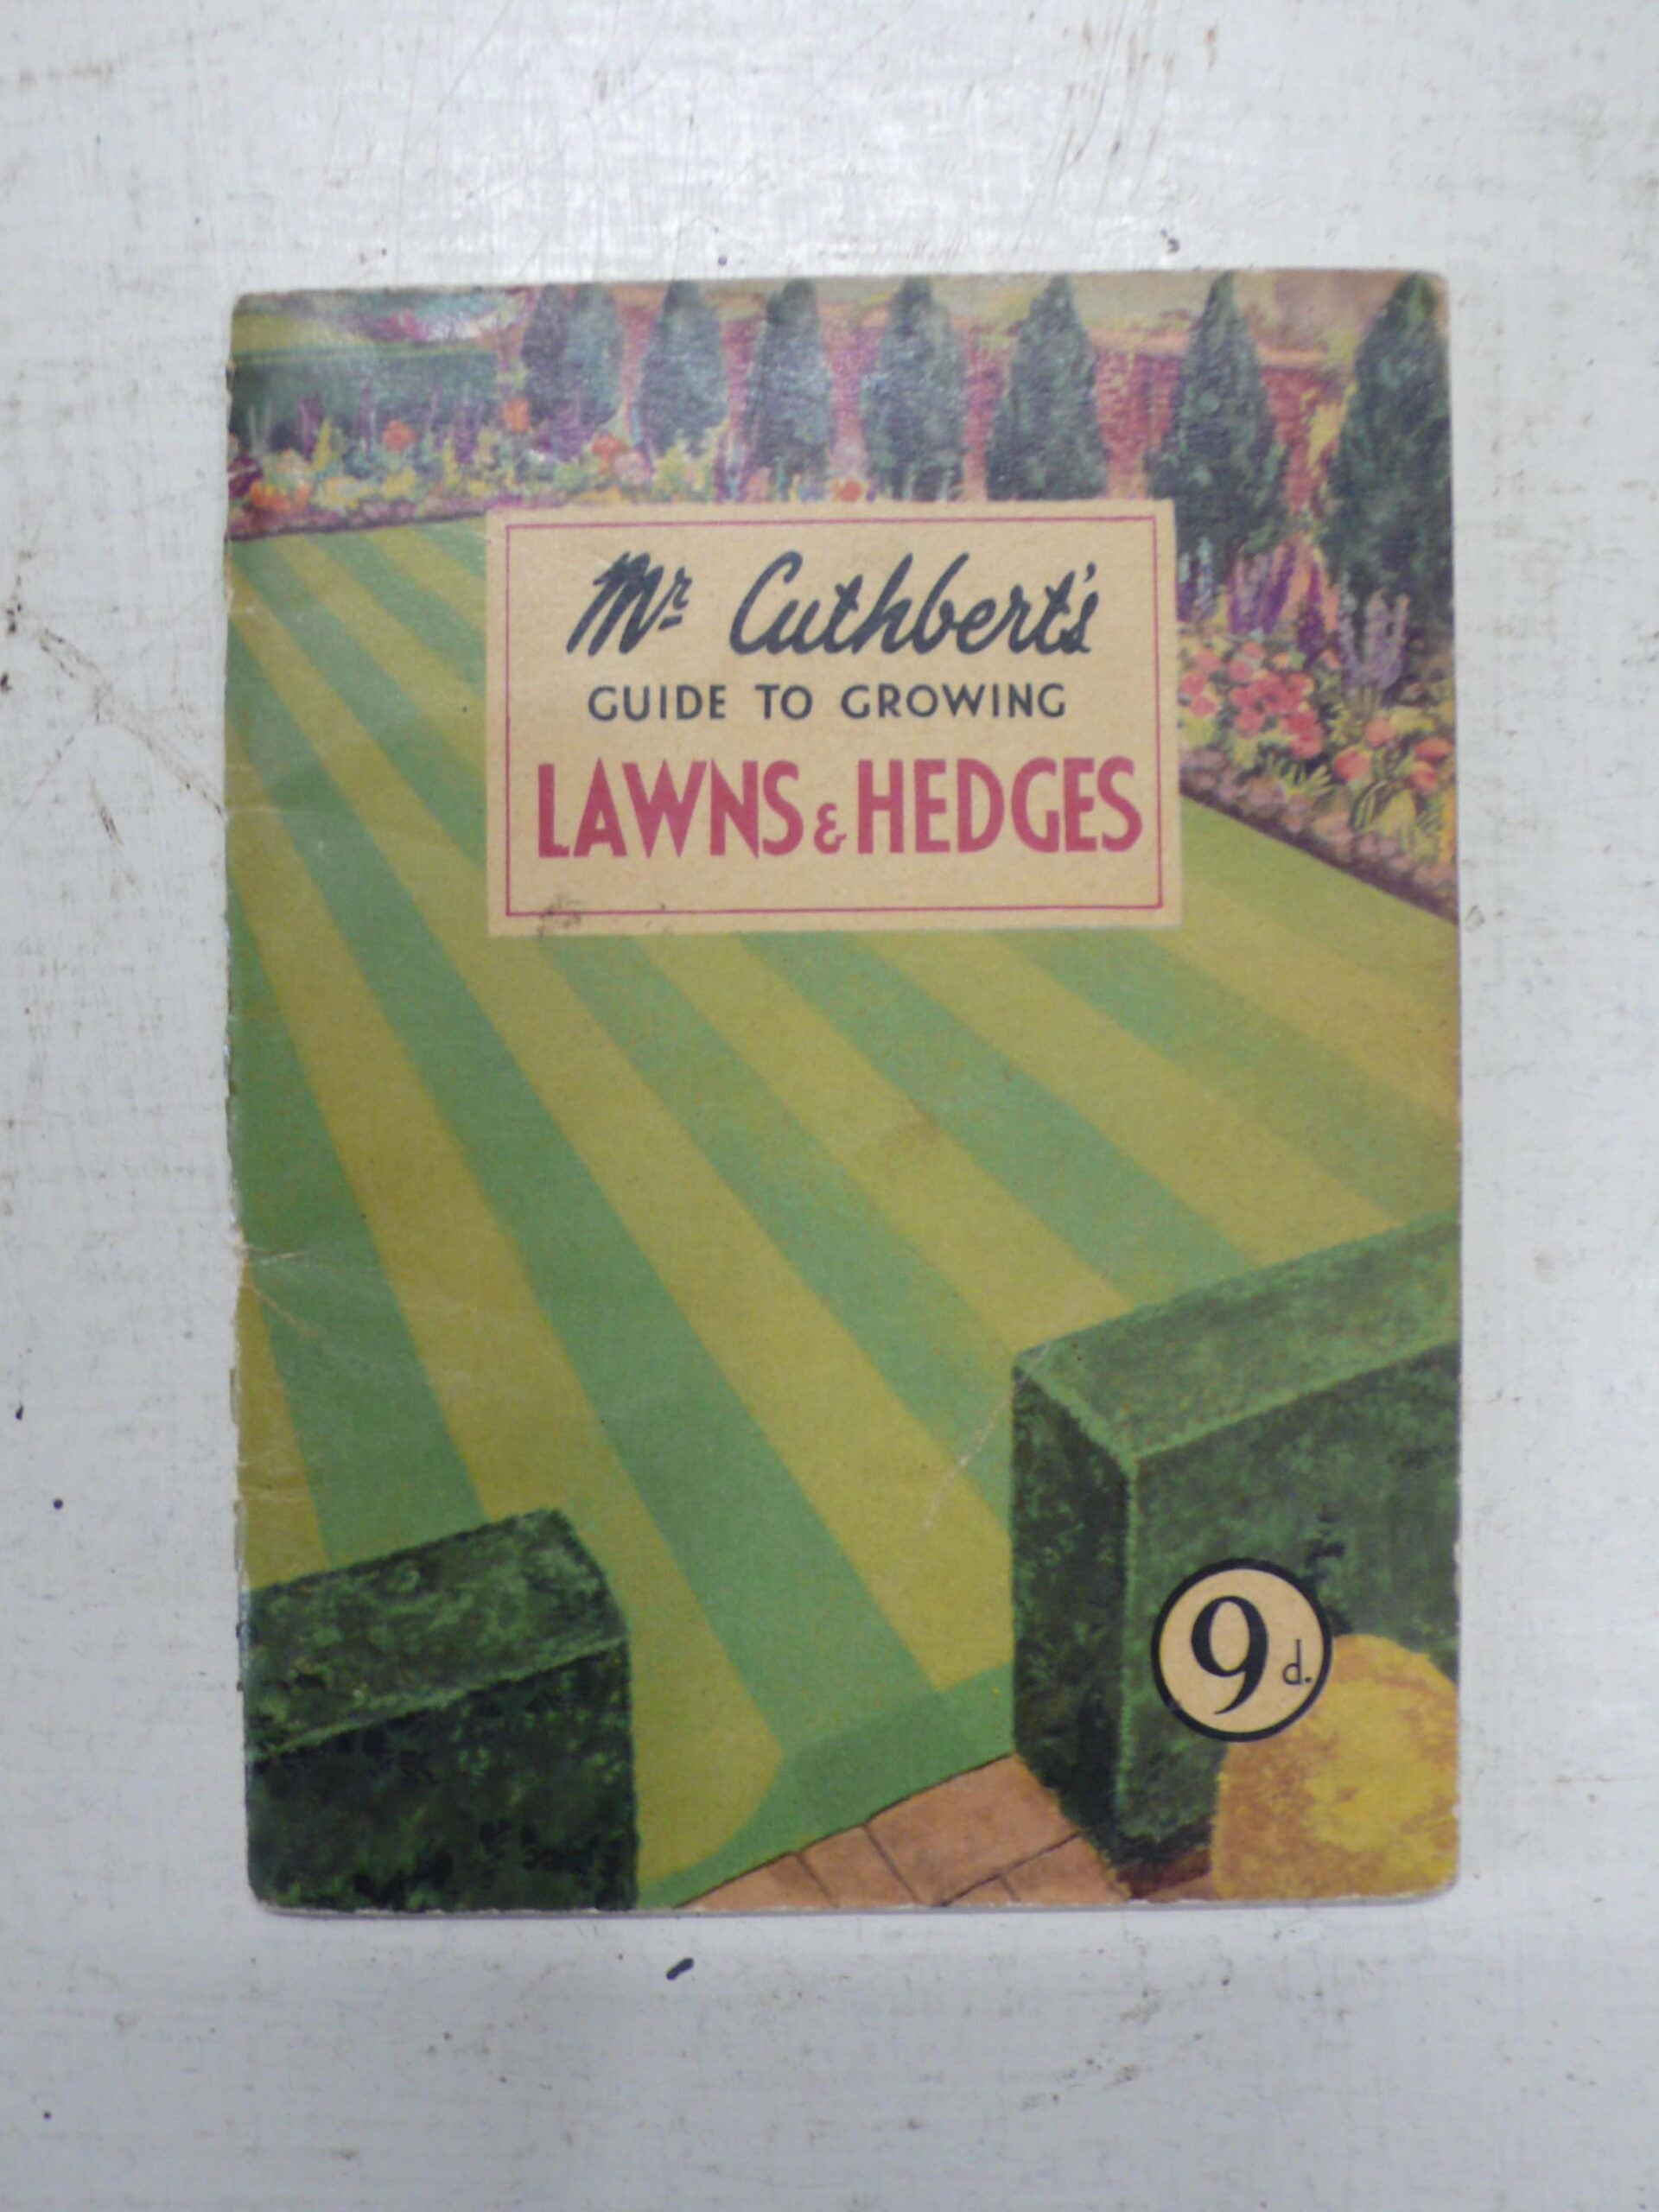 Mr Cuthberts Lawns Guide